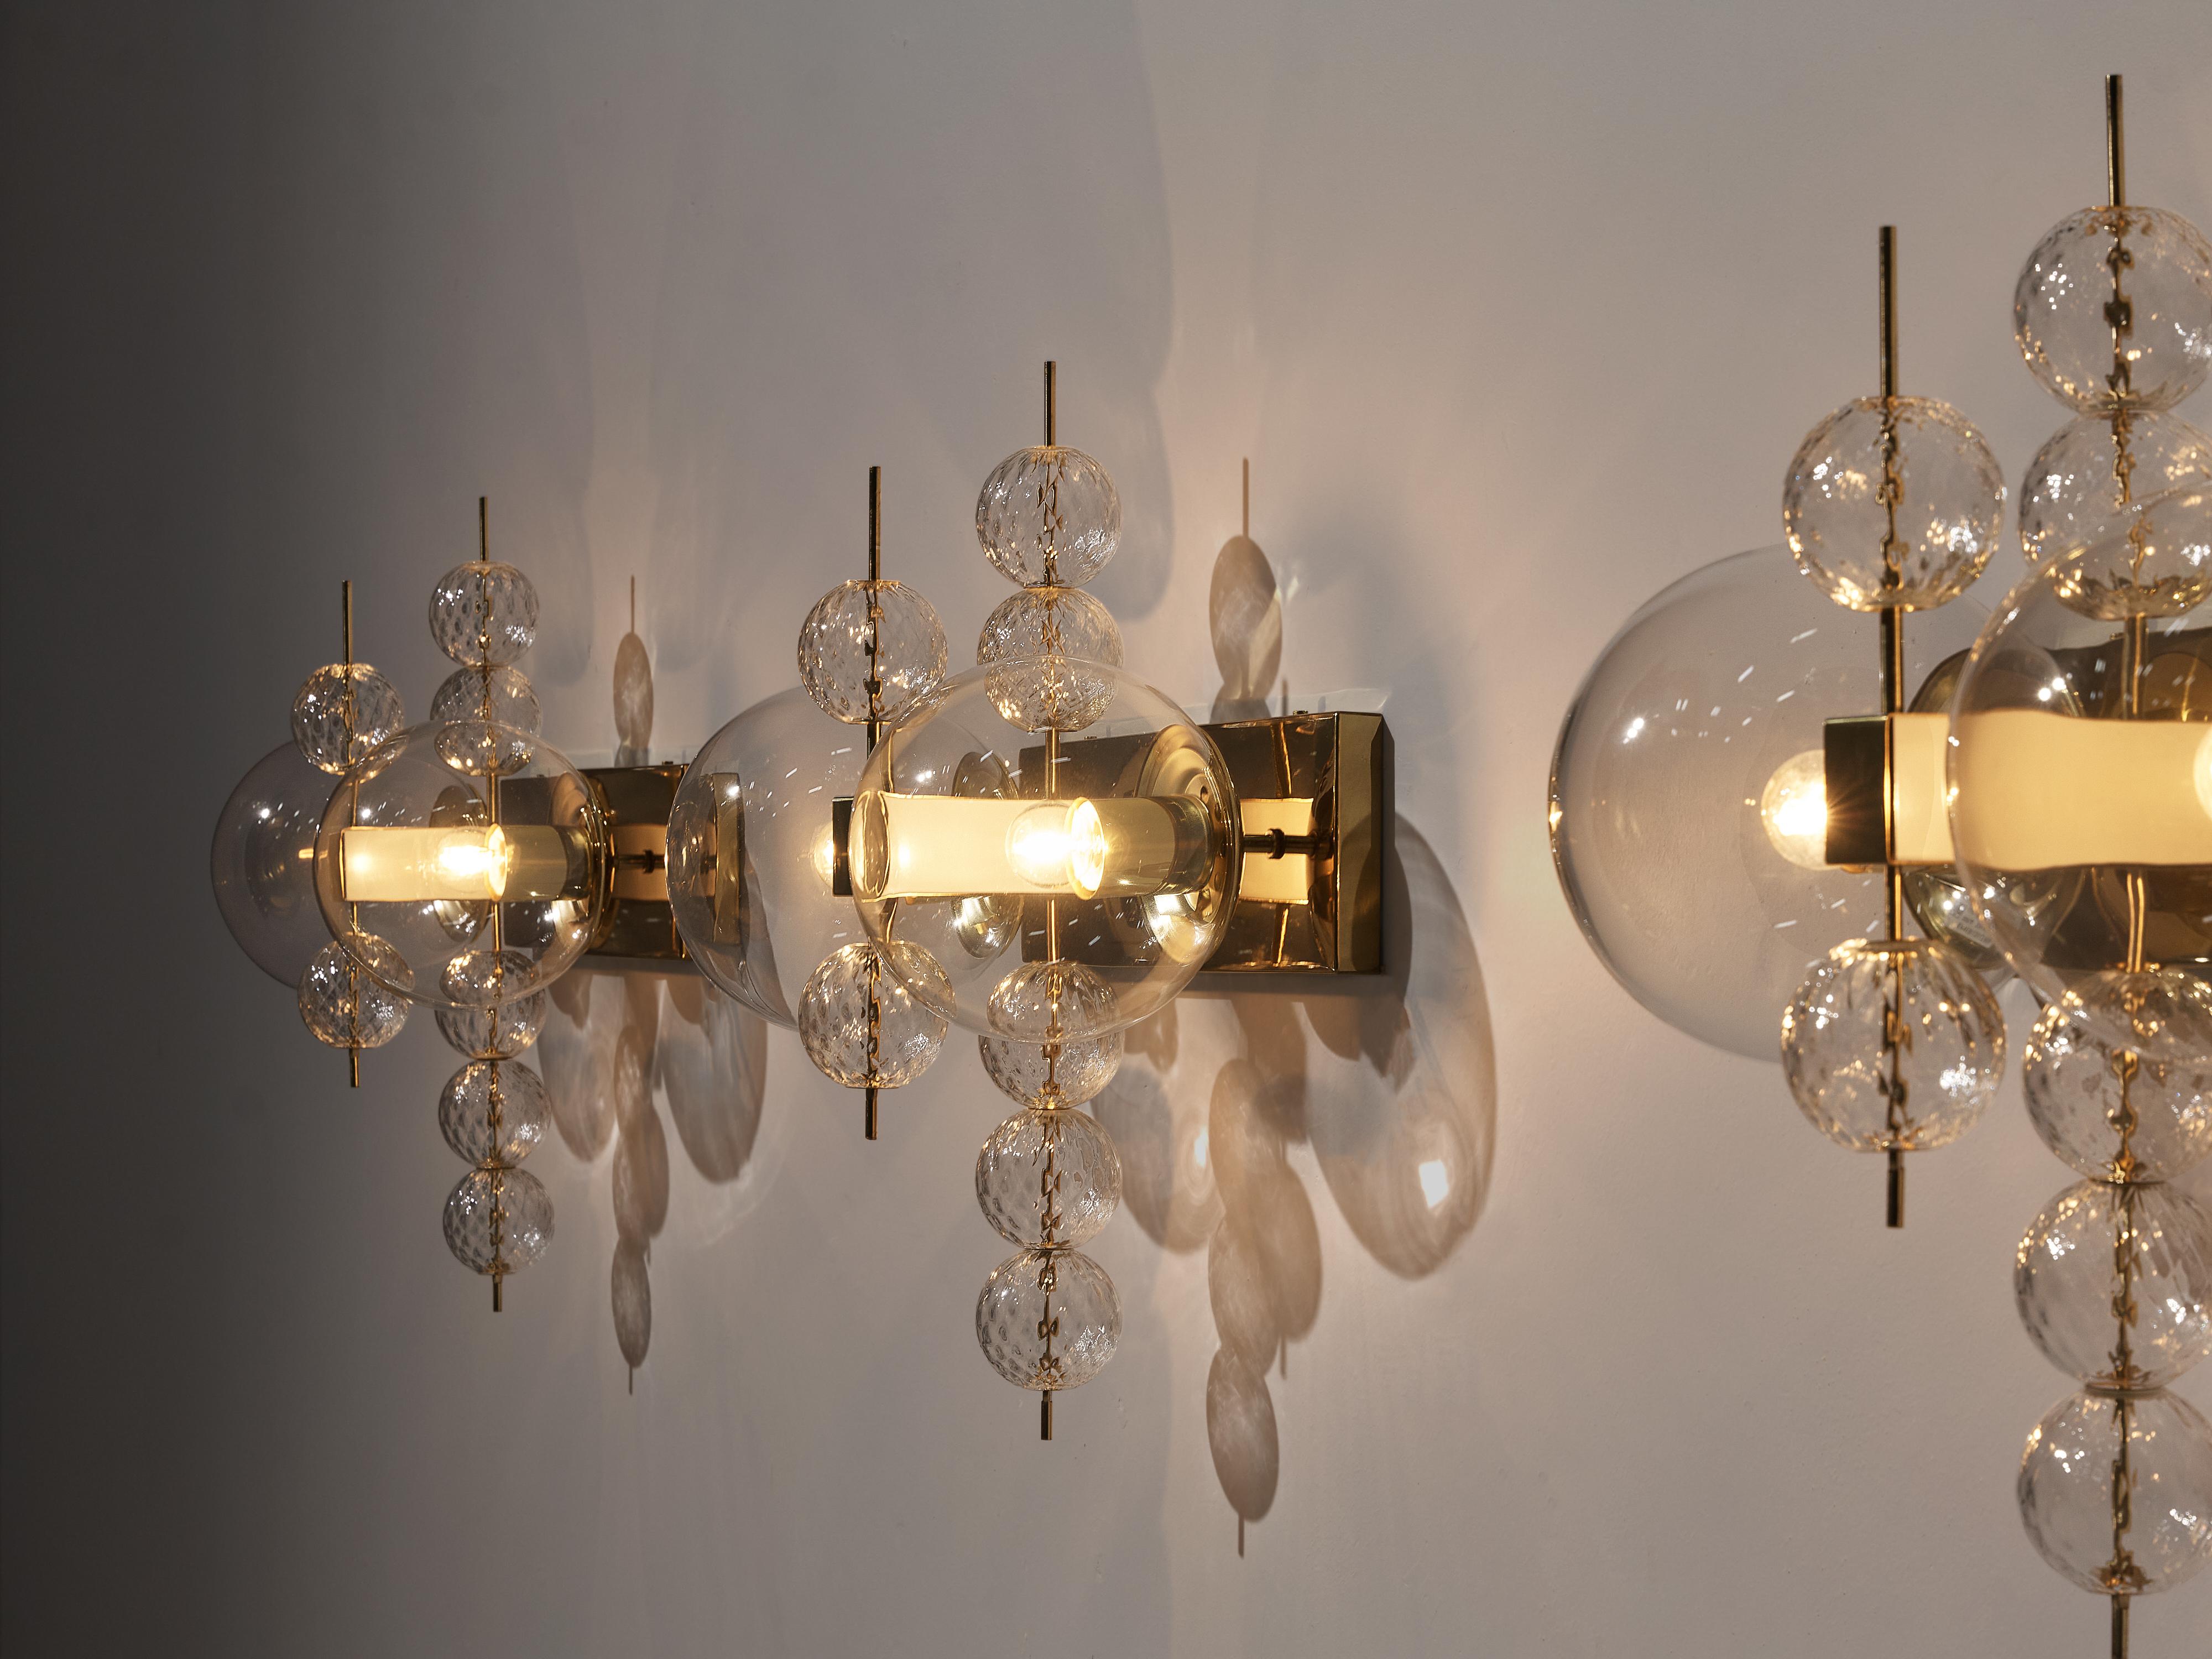 Wall lights, glass and brass, Europe, 1970s.

Ornate brass and glass wall light with two-light points and small decorative structured glass globes. The lamps are beautifully decorated thanks to the structured glass. The clear glass shades bring a